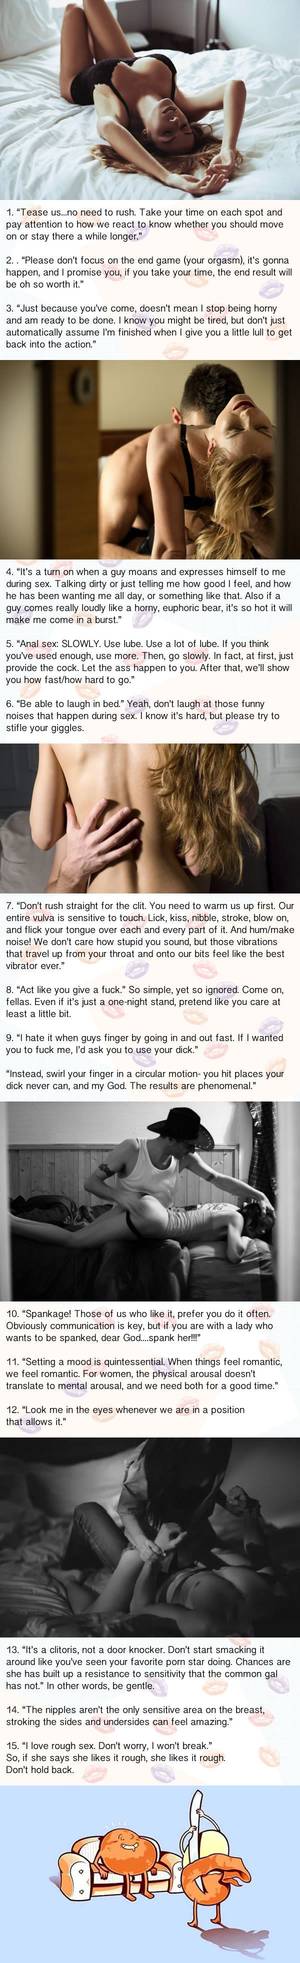 Married Sex Funny - 15 sex tips women wish you knew